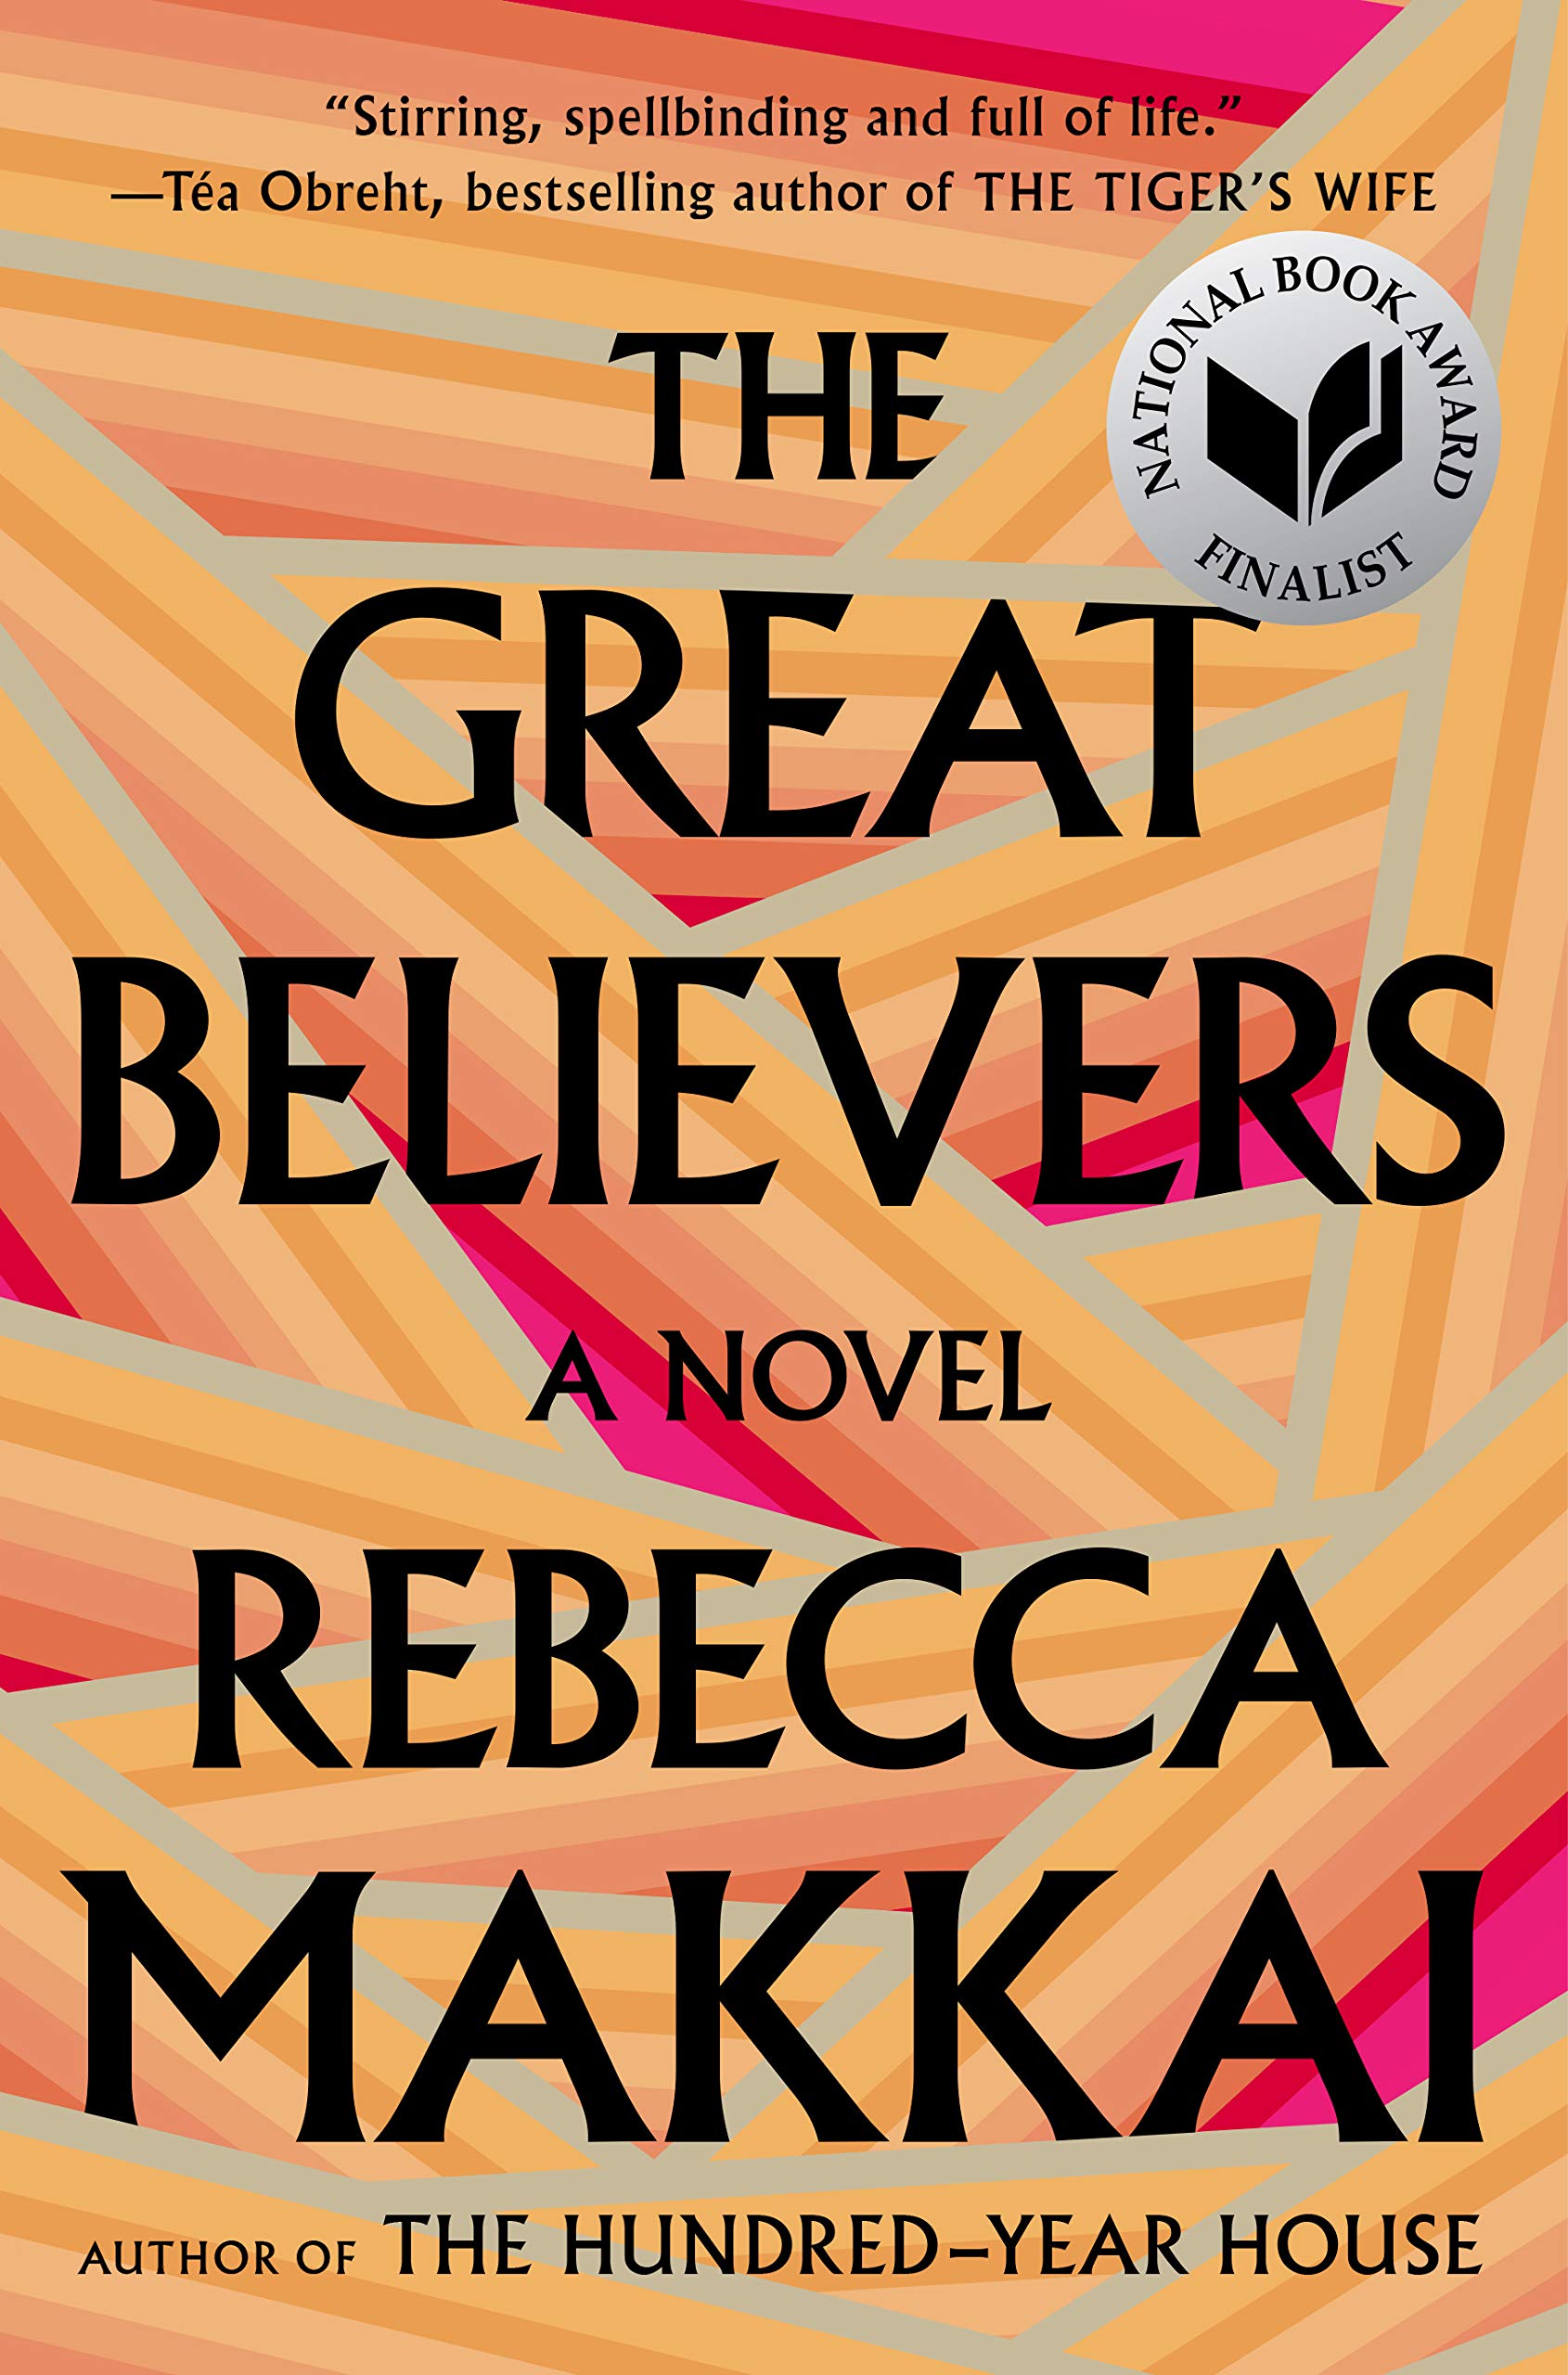 A book cover for The Great Believers